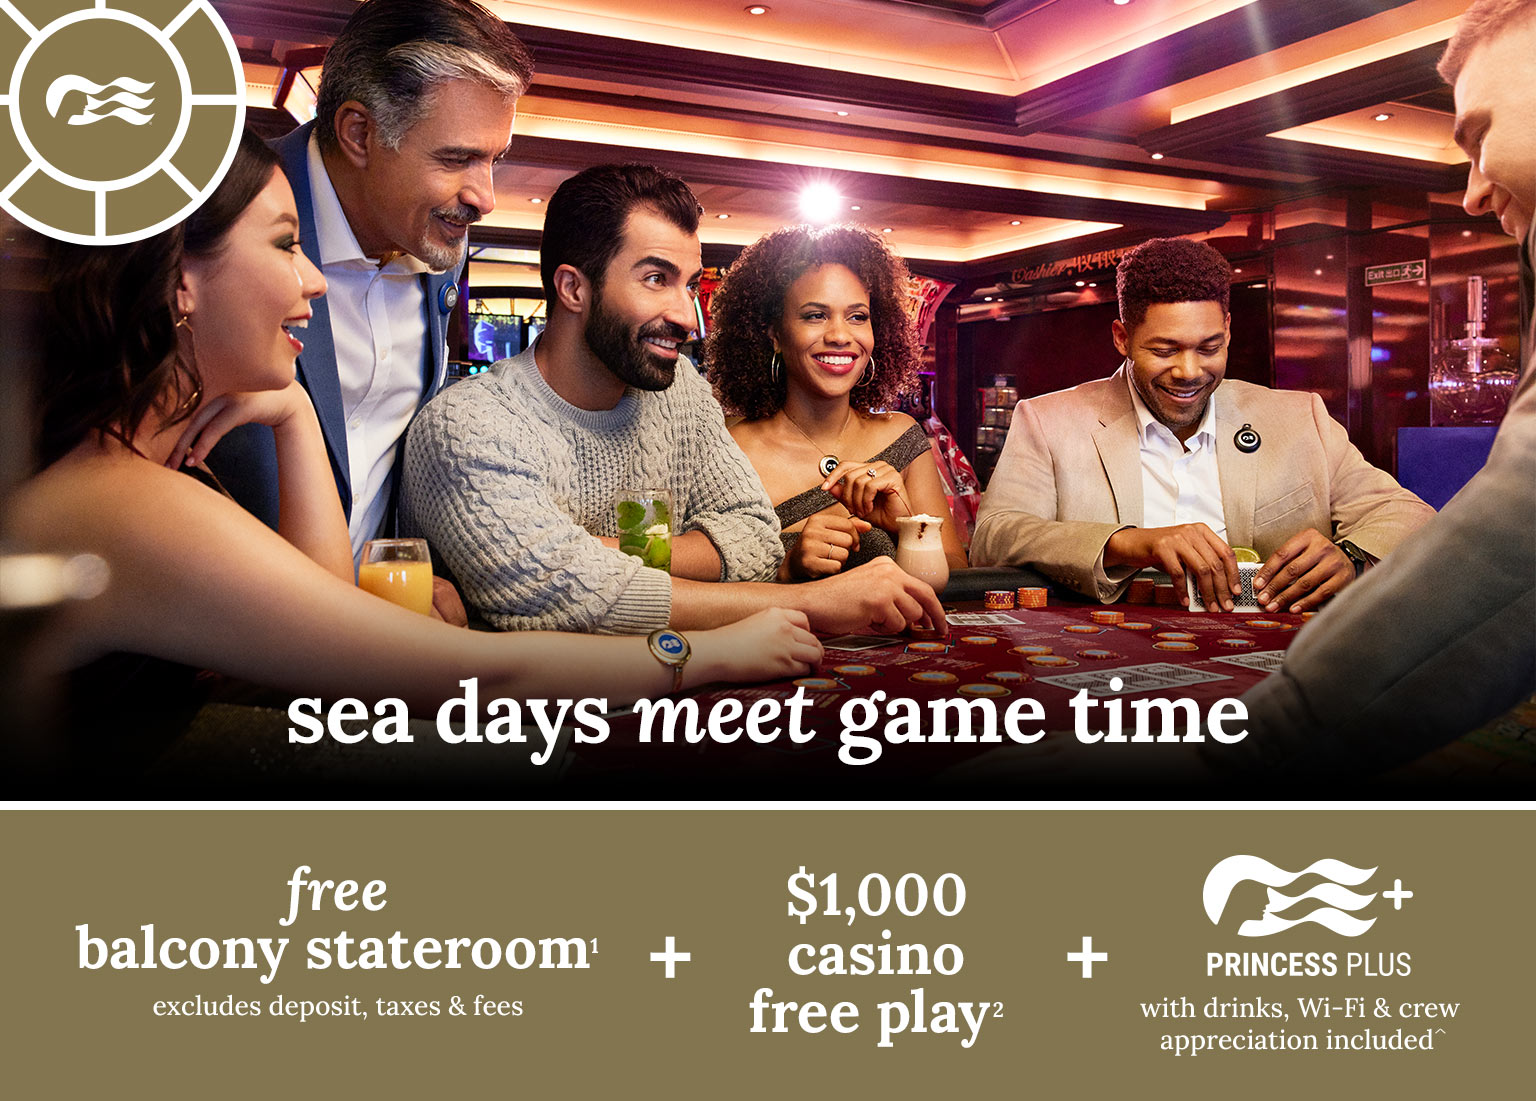 Group of people playing poker. free balcony stateroom + $1000 casino free play + Princess Plus. Click here to book.